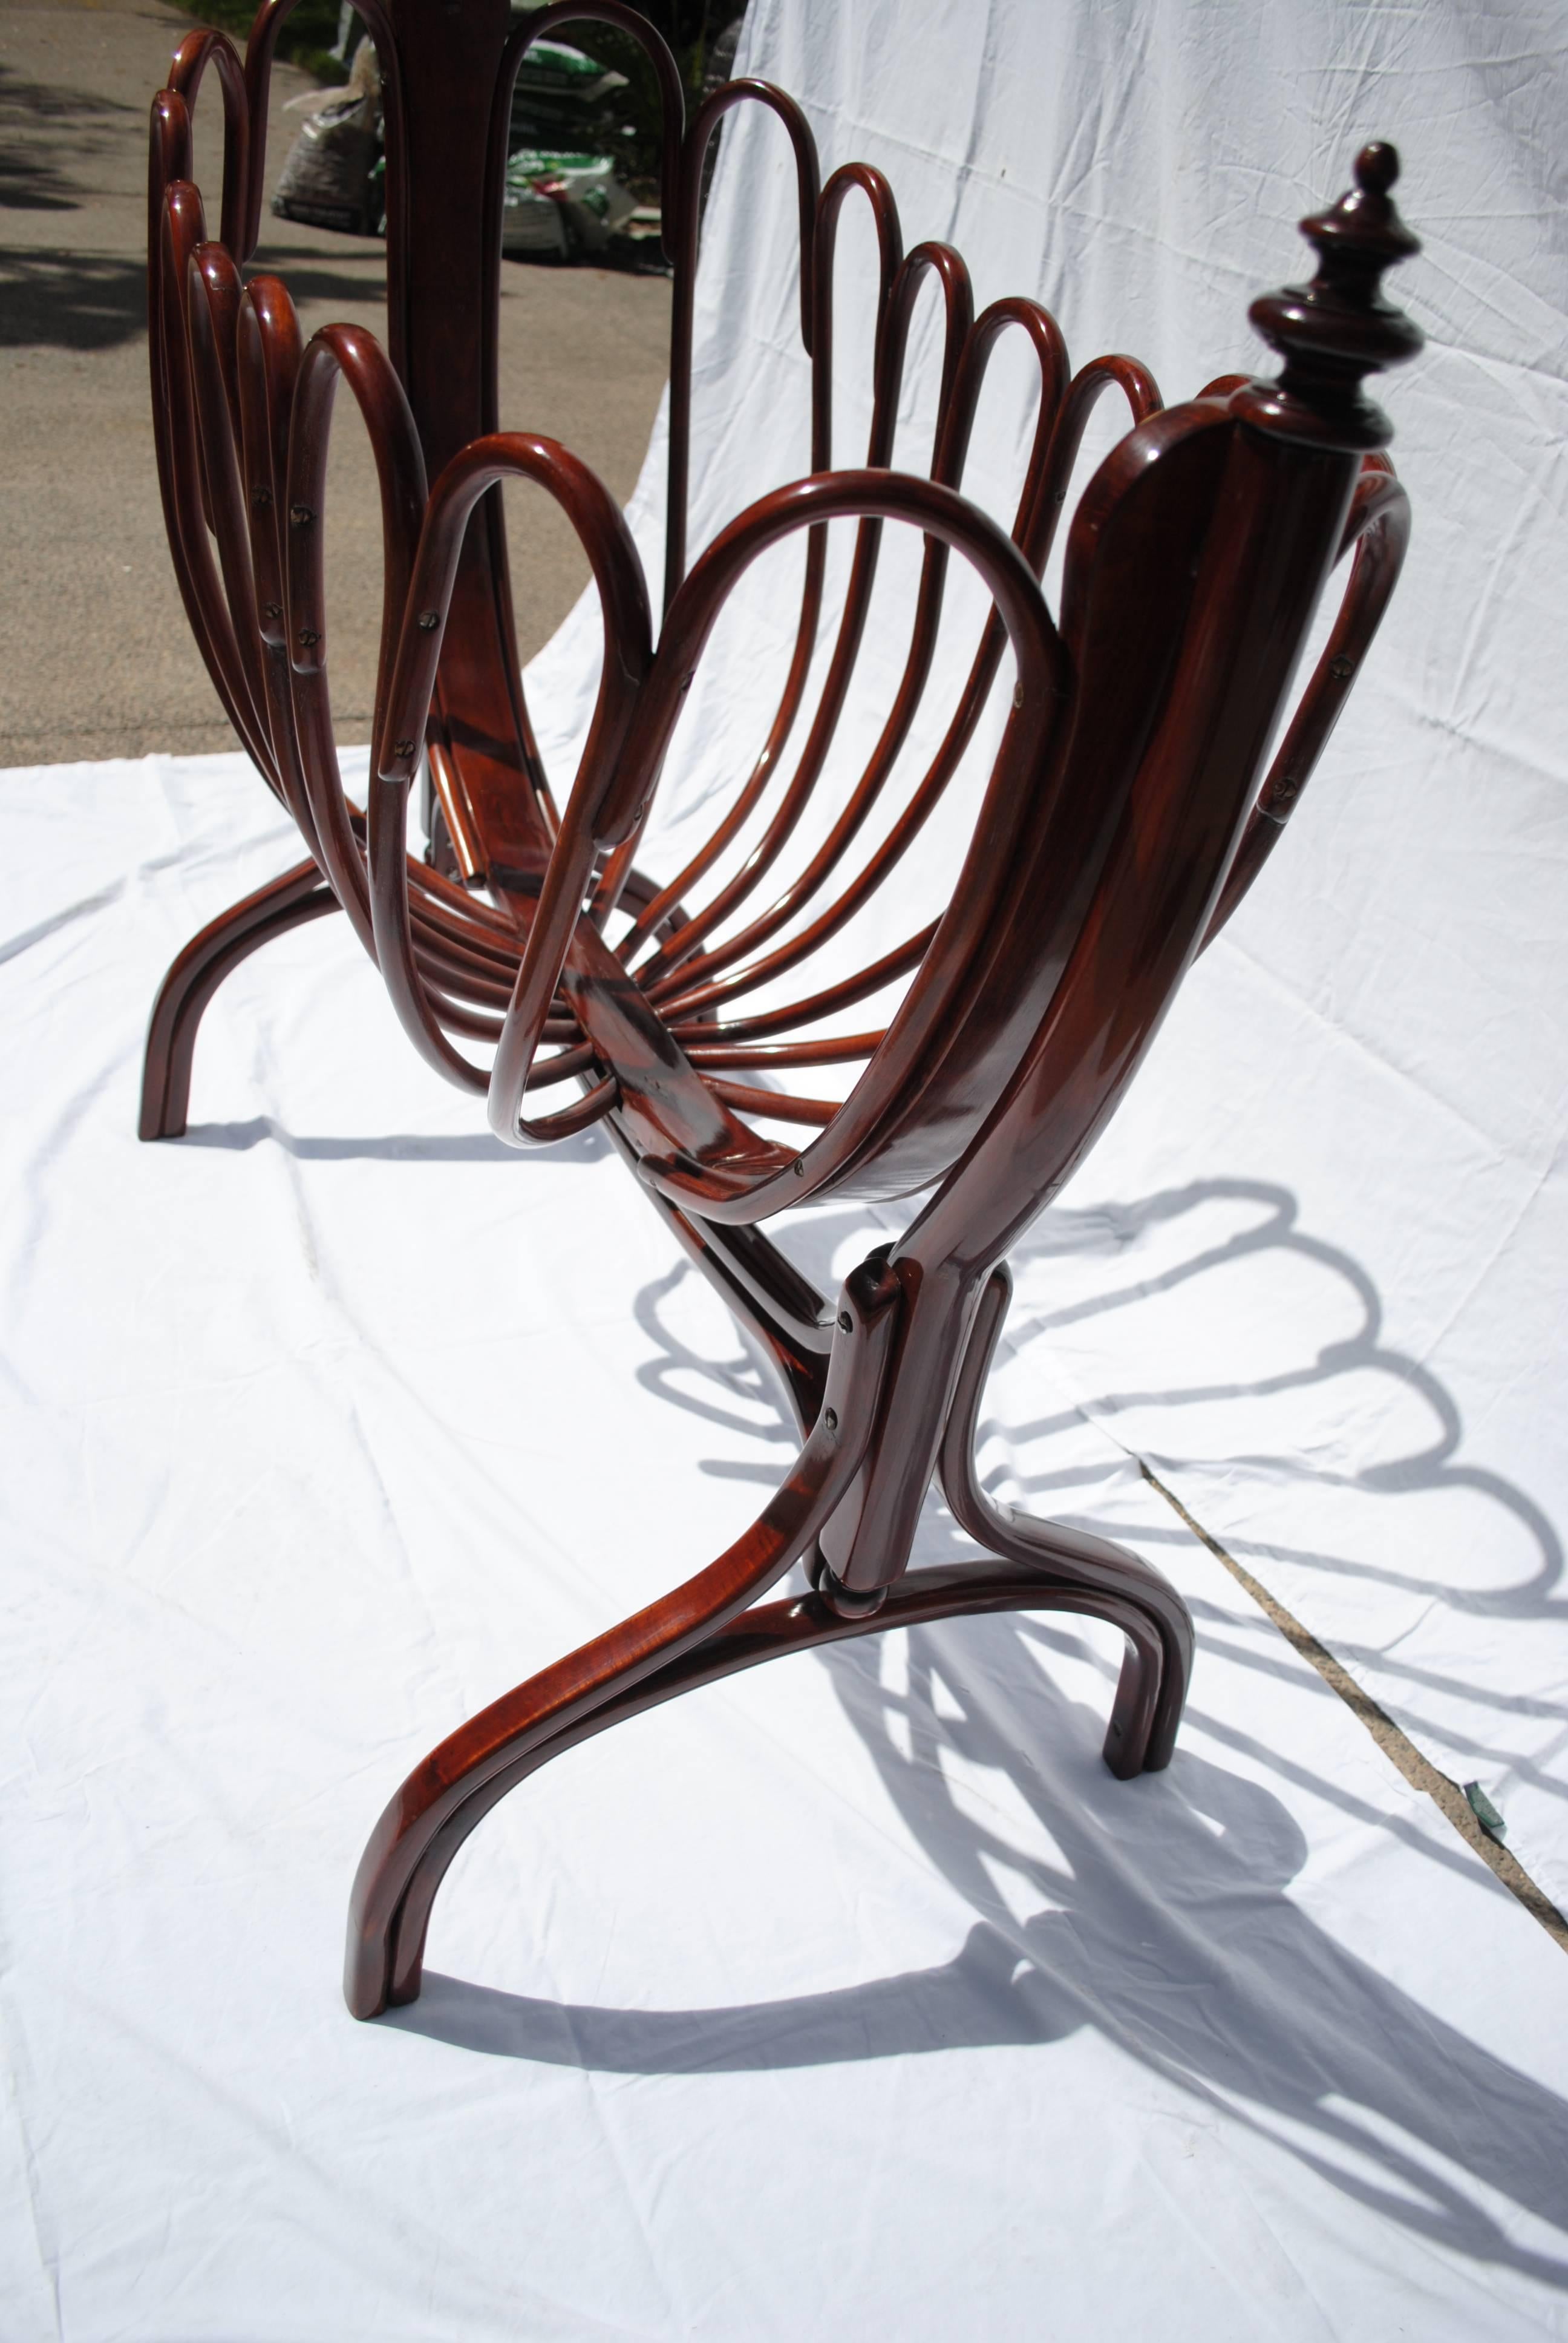 A gorgeous piece in the Art Nouveau style with arching swirl's of glossy mahogany bentwood's. Designed by Jacob and Josef Kohn, the Kohn brothers advanced Thonet's bentwood technique to create designs that are truly works of art. A similar cradle is